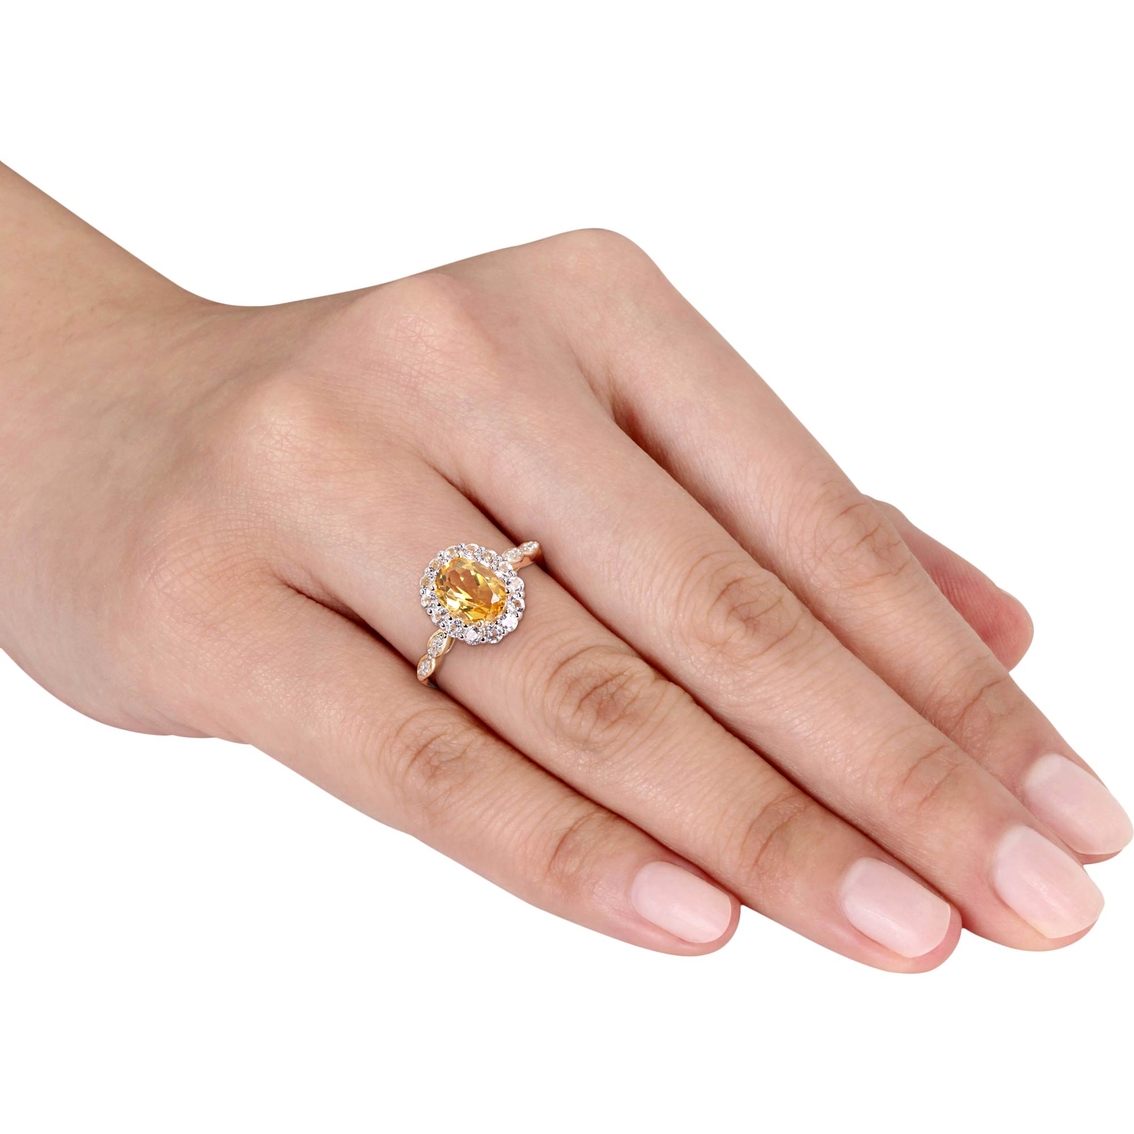 Sofia B. 14K Yellow Gold Citrine and White Topaz and Diamond Accent Halo Ring - Image 4 of 4